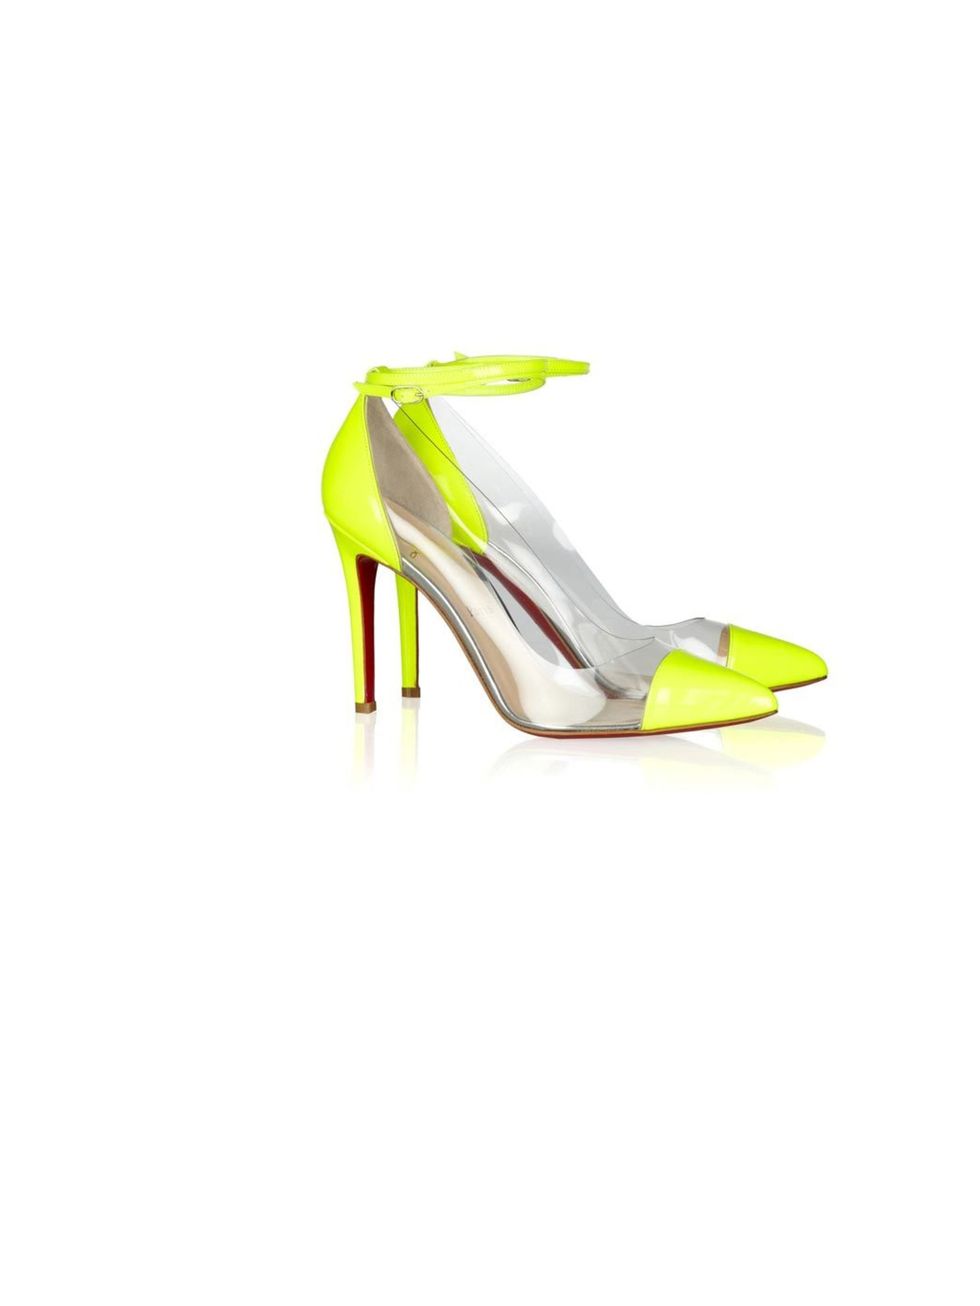 <p>Christian Louboutin 'Un Bout' leather &amp; PVC heels, £475, for stockists call 0207 491 0033</p>